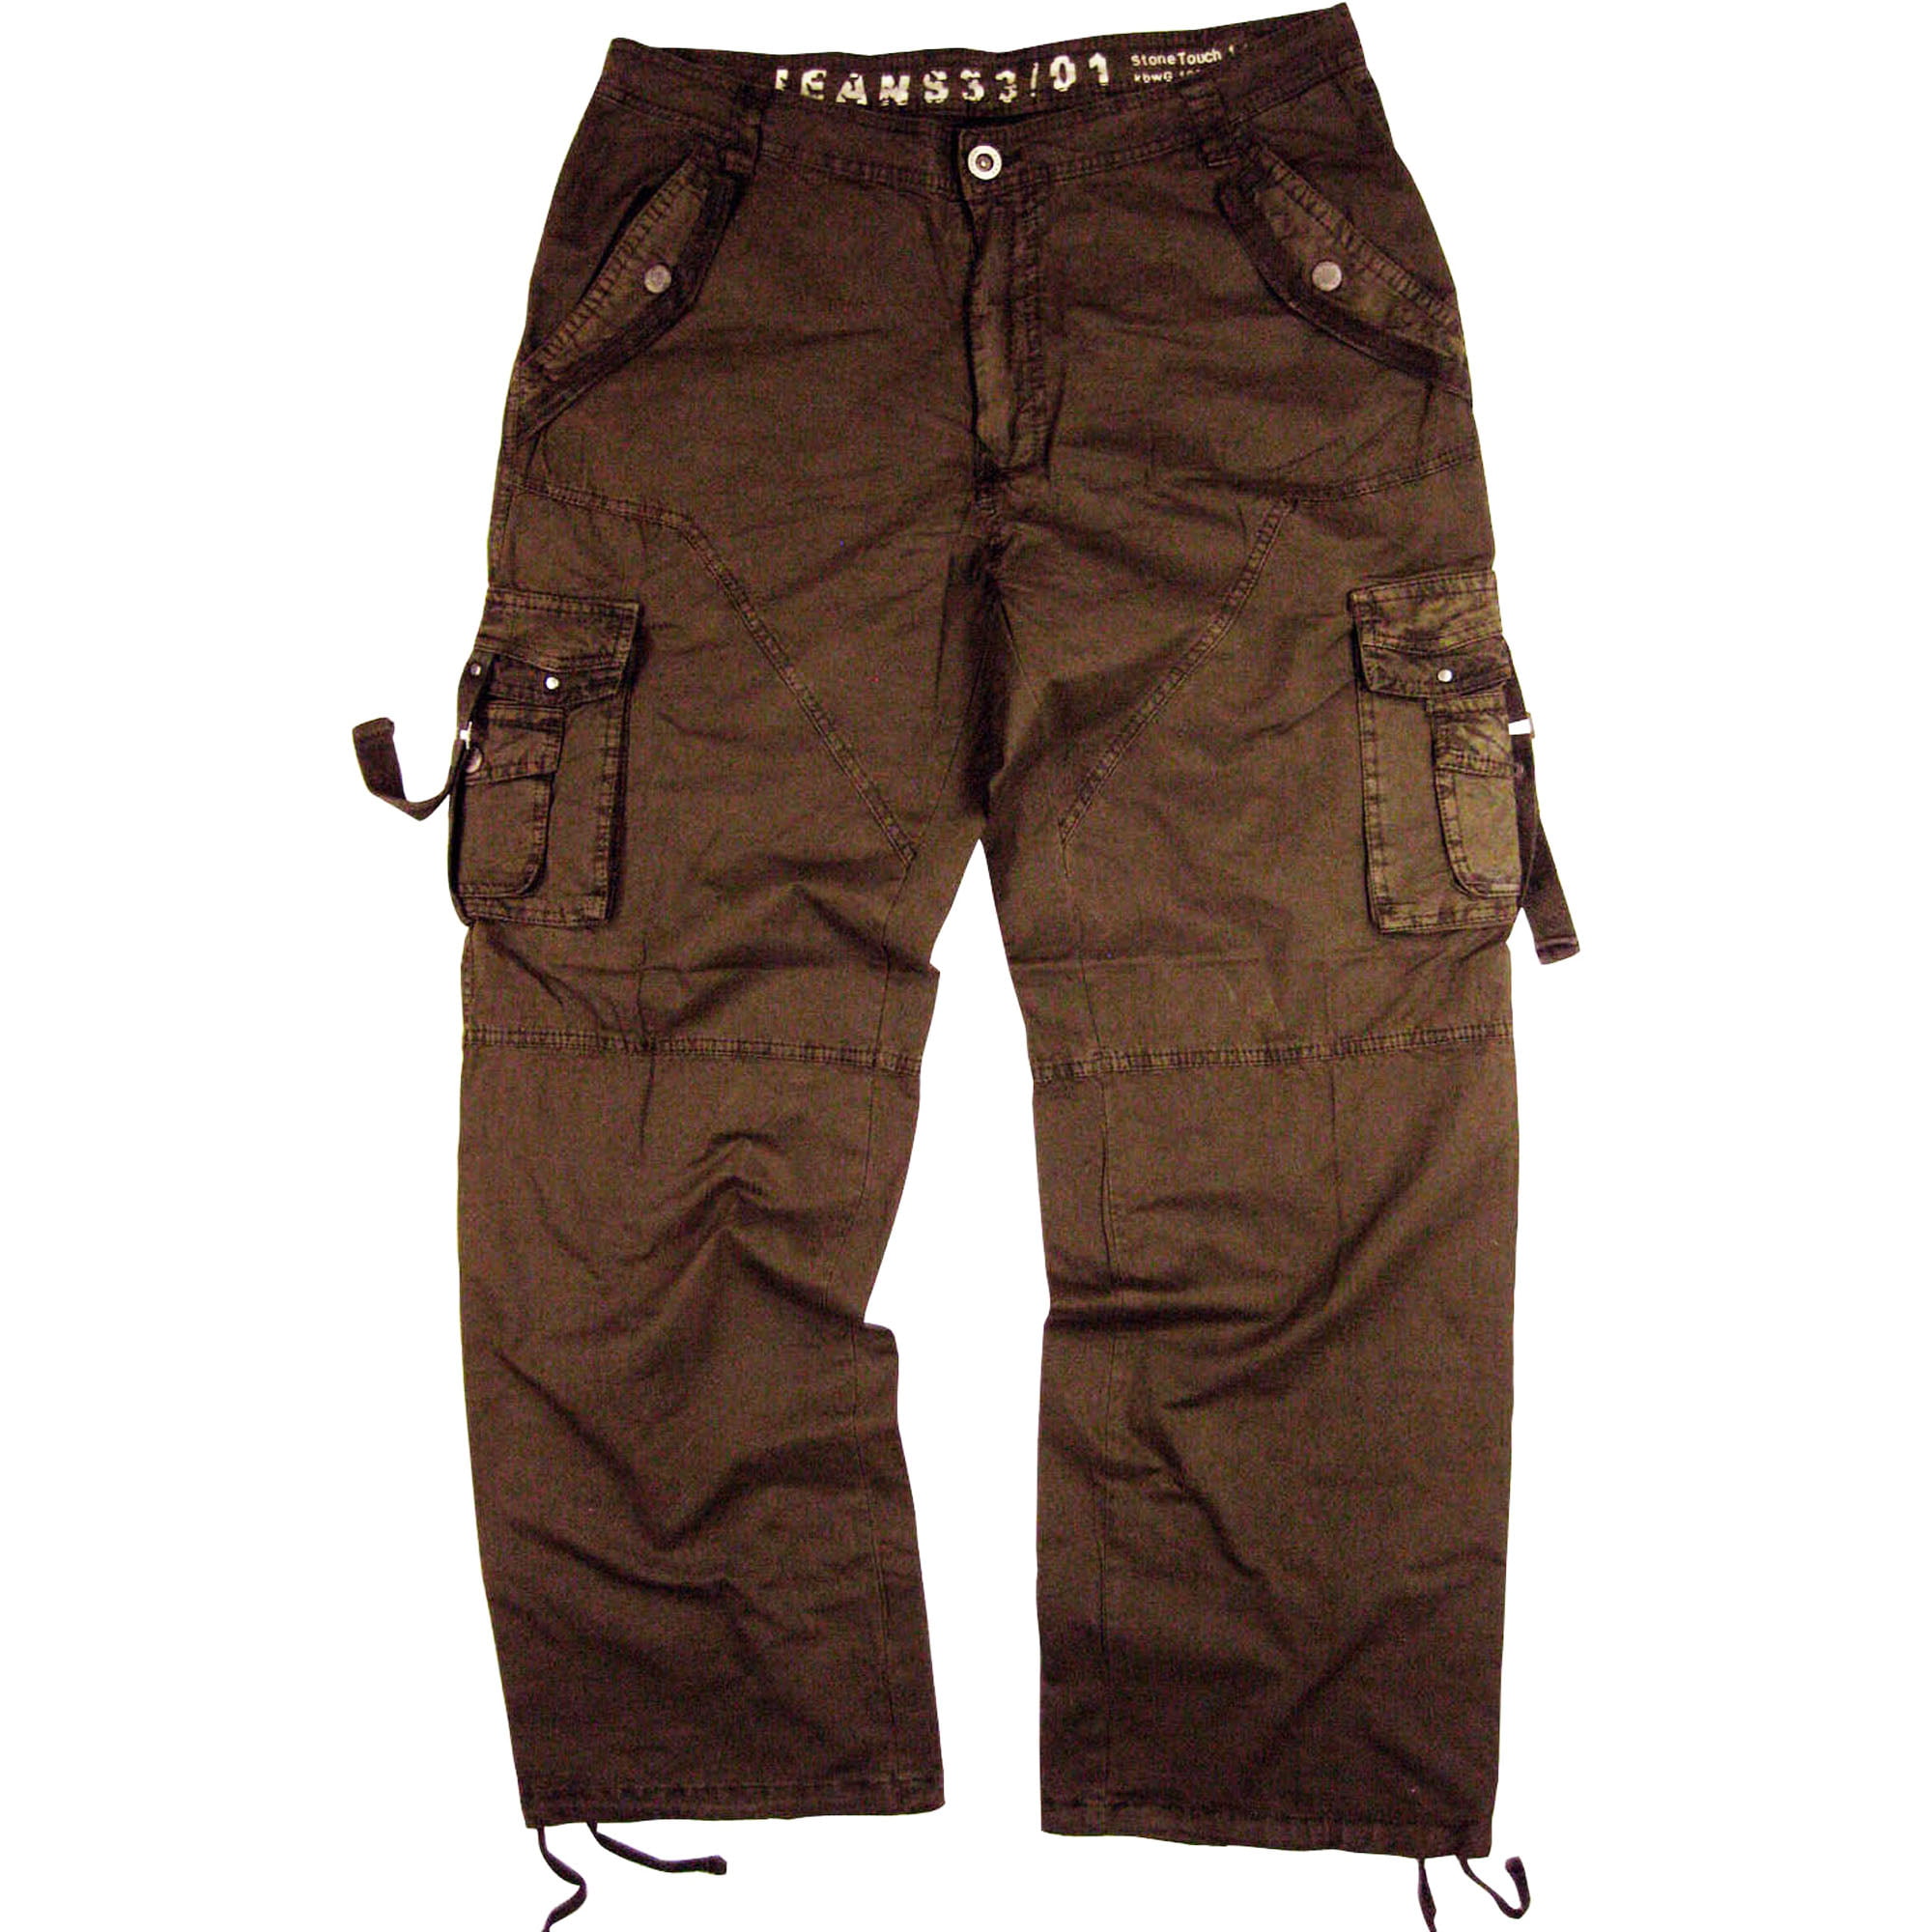 StoneTouch Men's Military-Style Plus size Cargo Pants 48x32 Brown Color ...